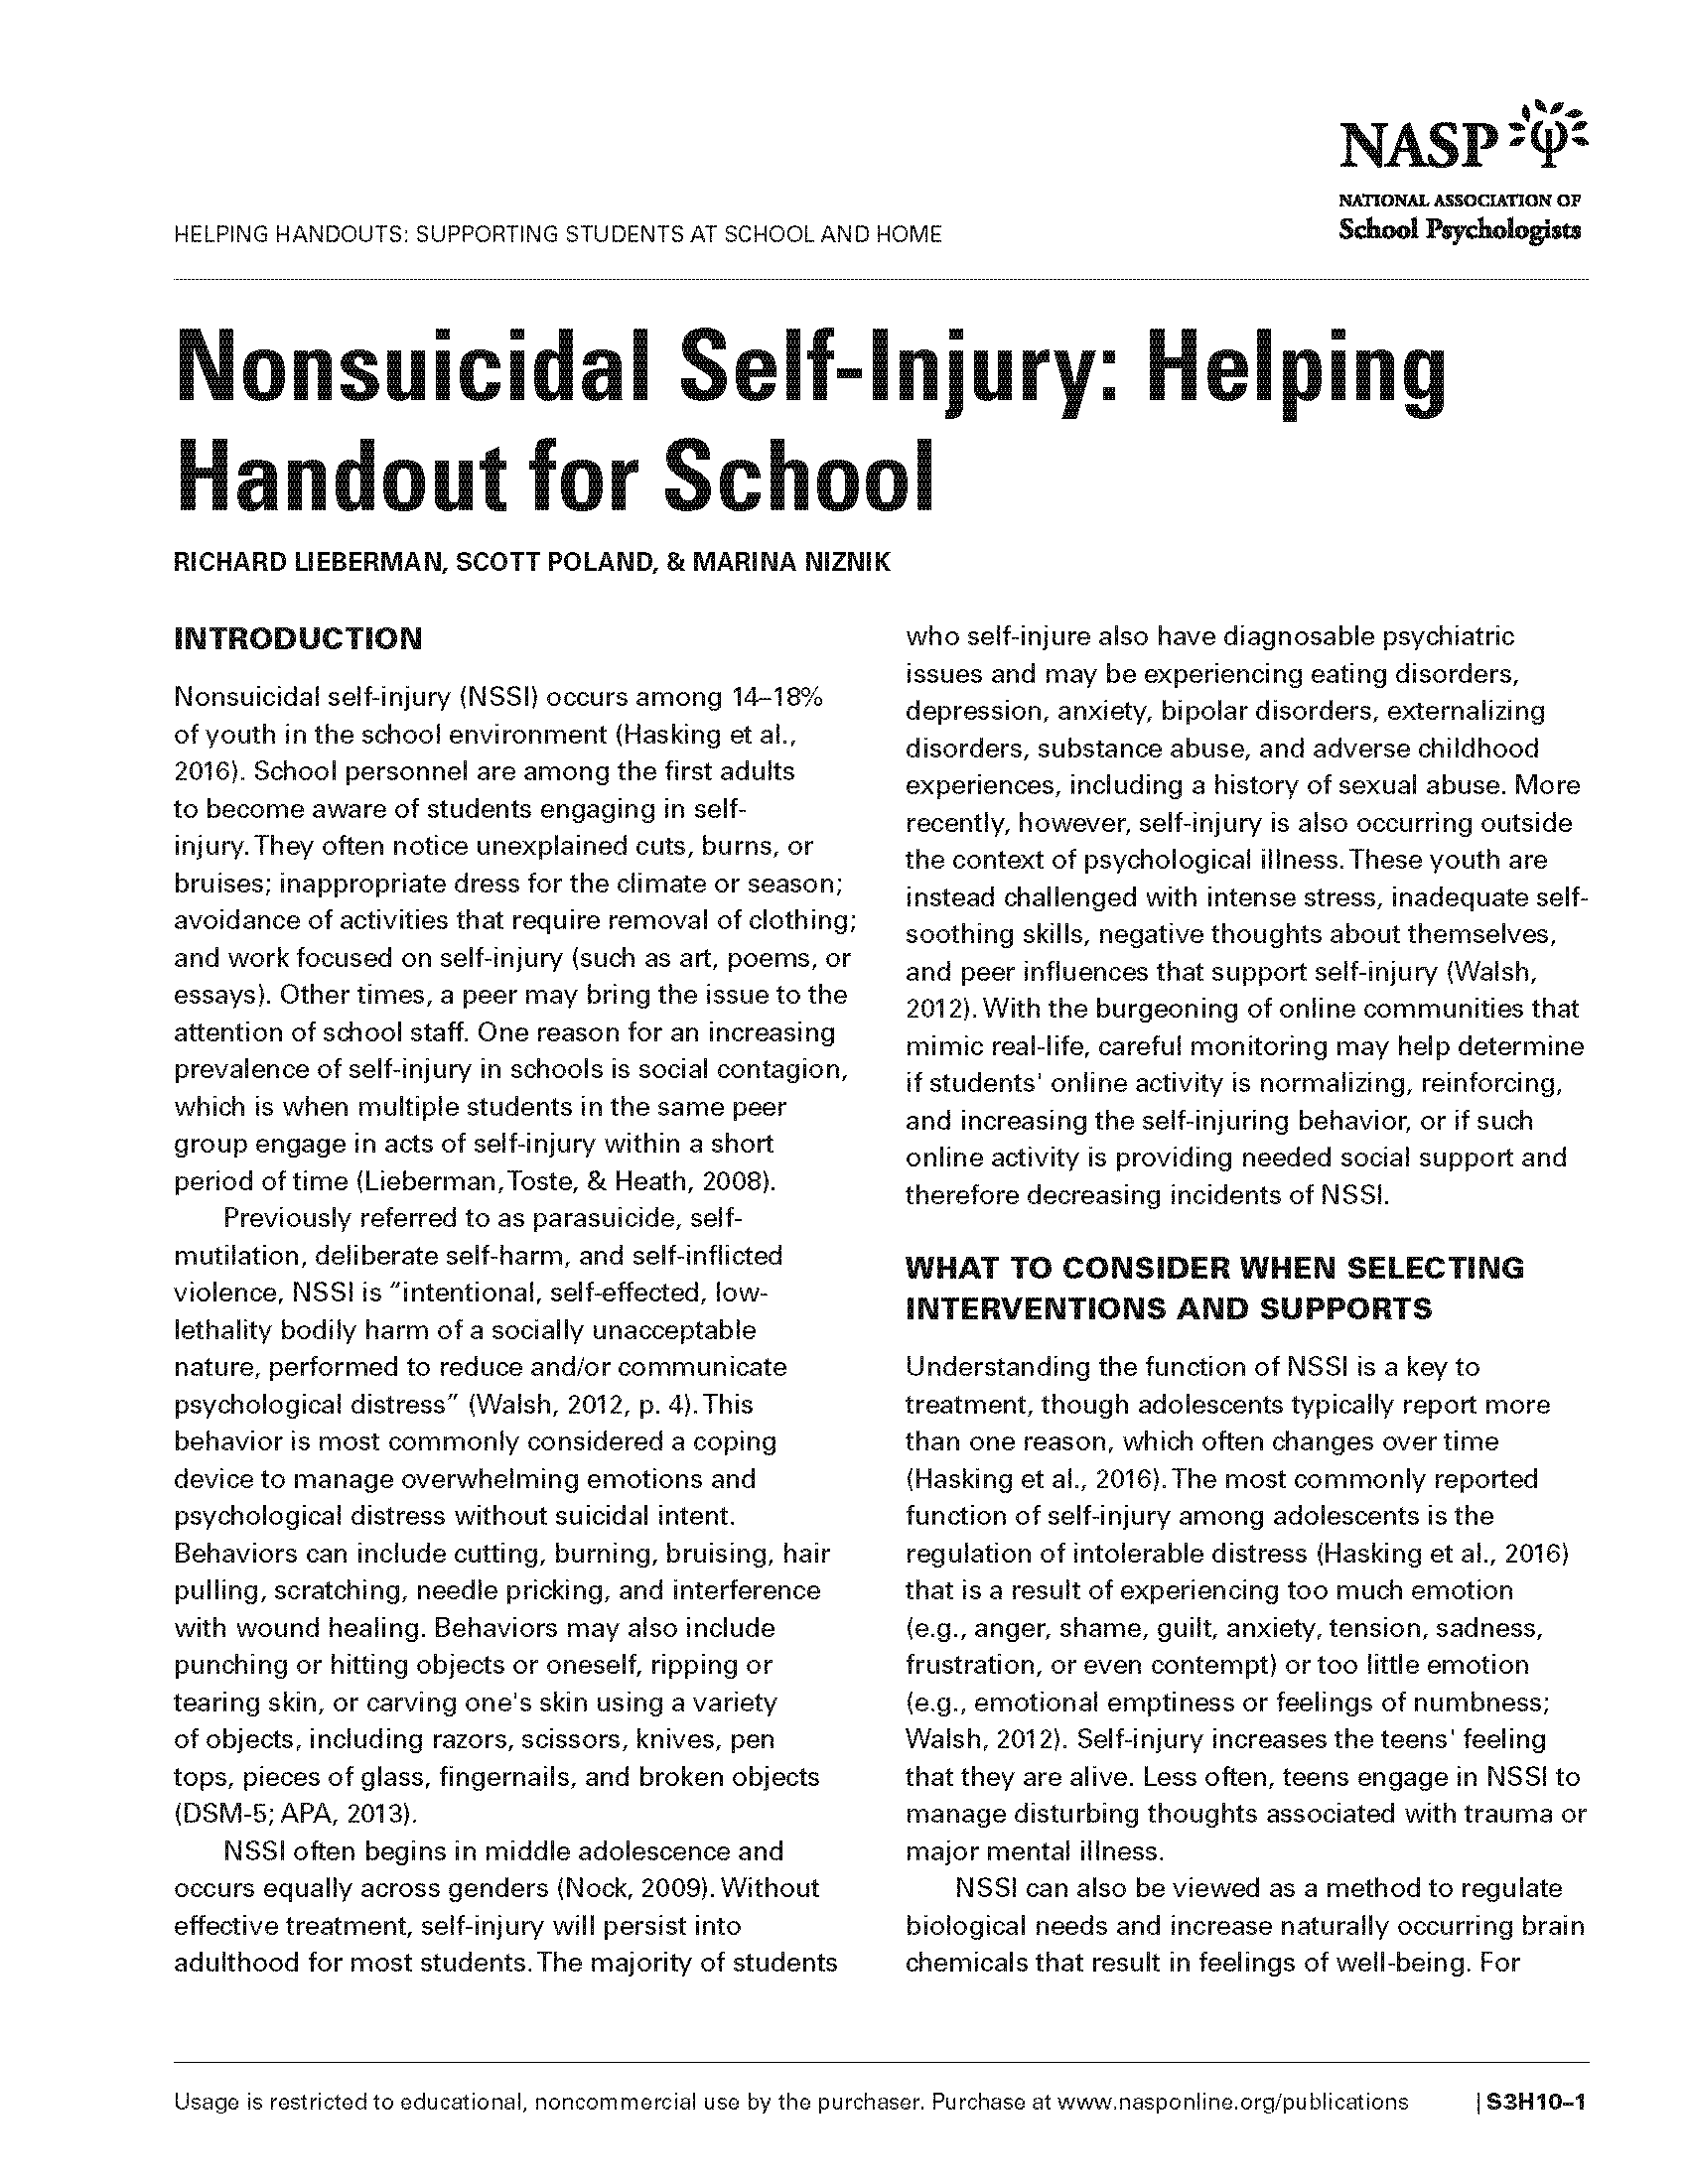 Nonsuicidal Self-Injury: Helping Handout for School